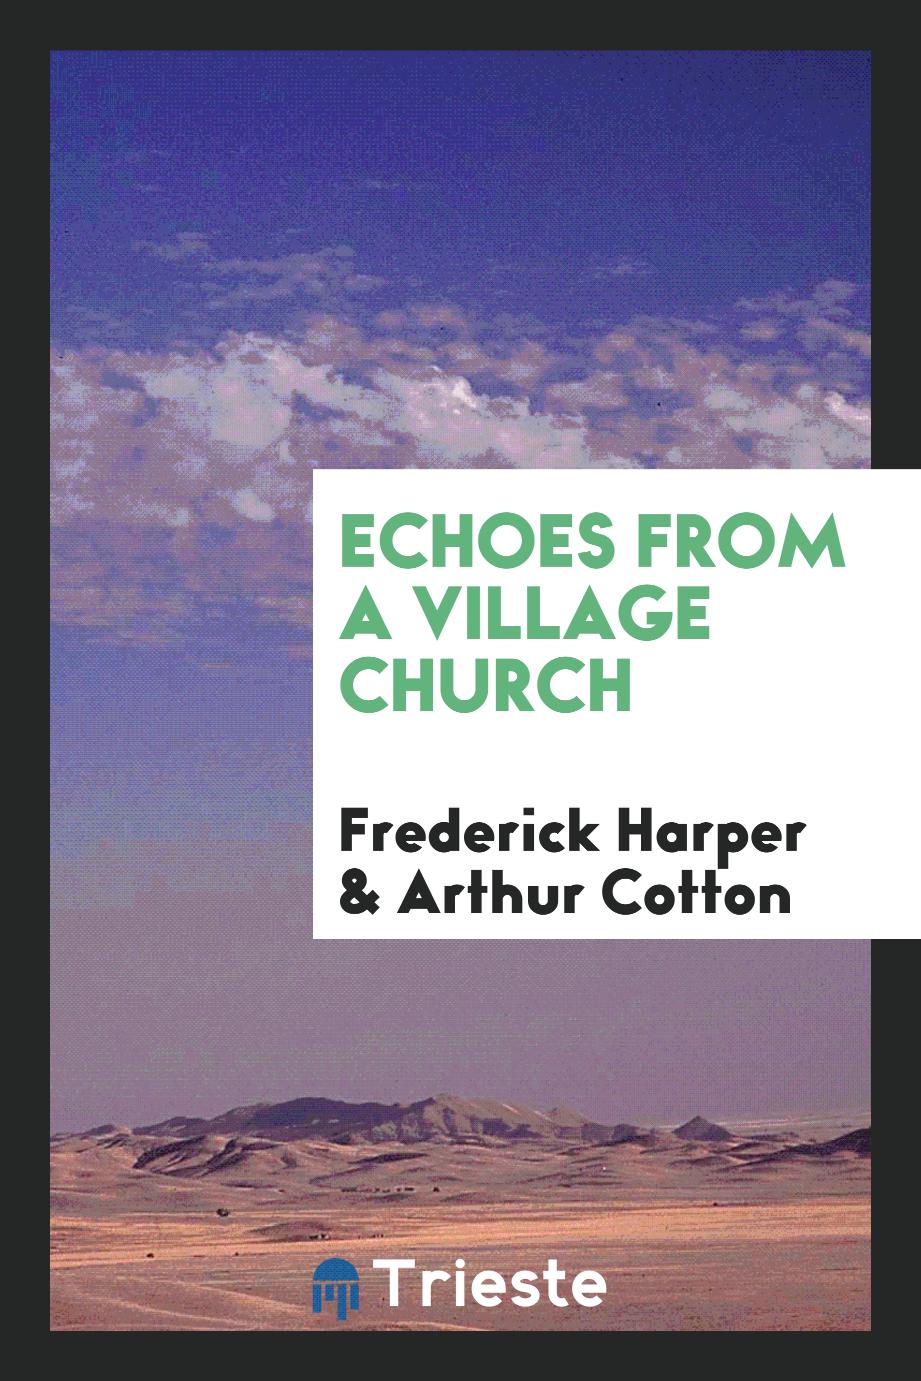 Echoes from a Village Church